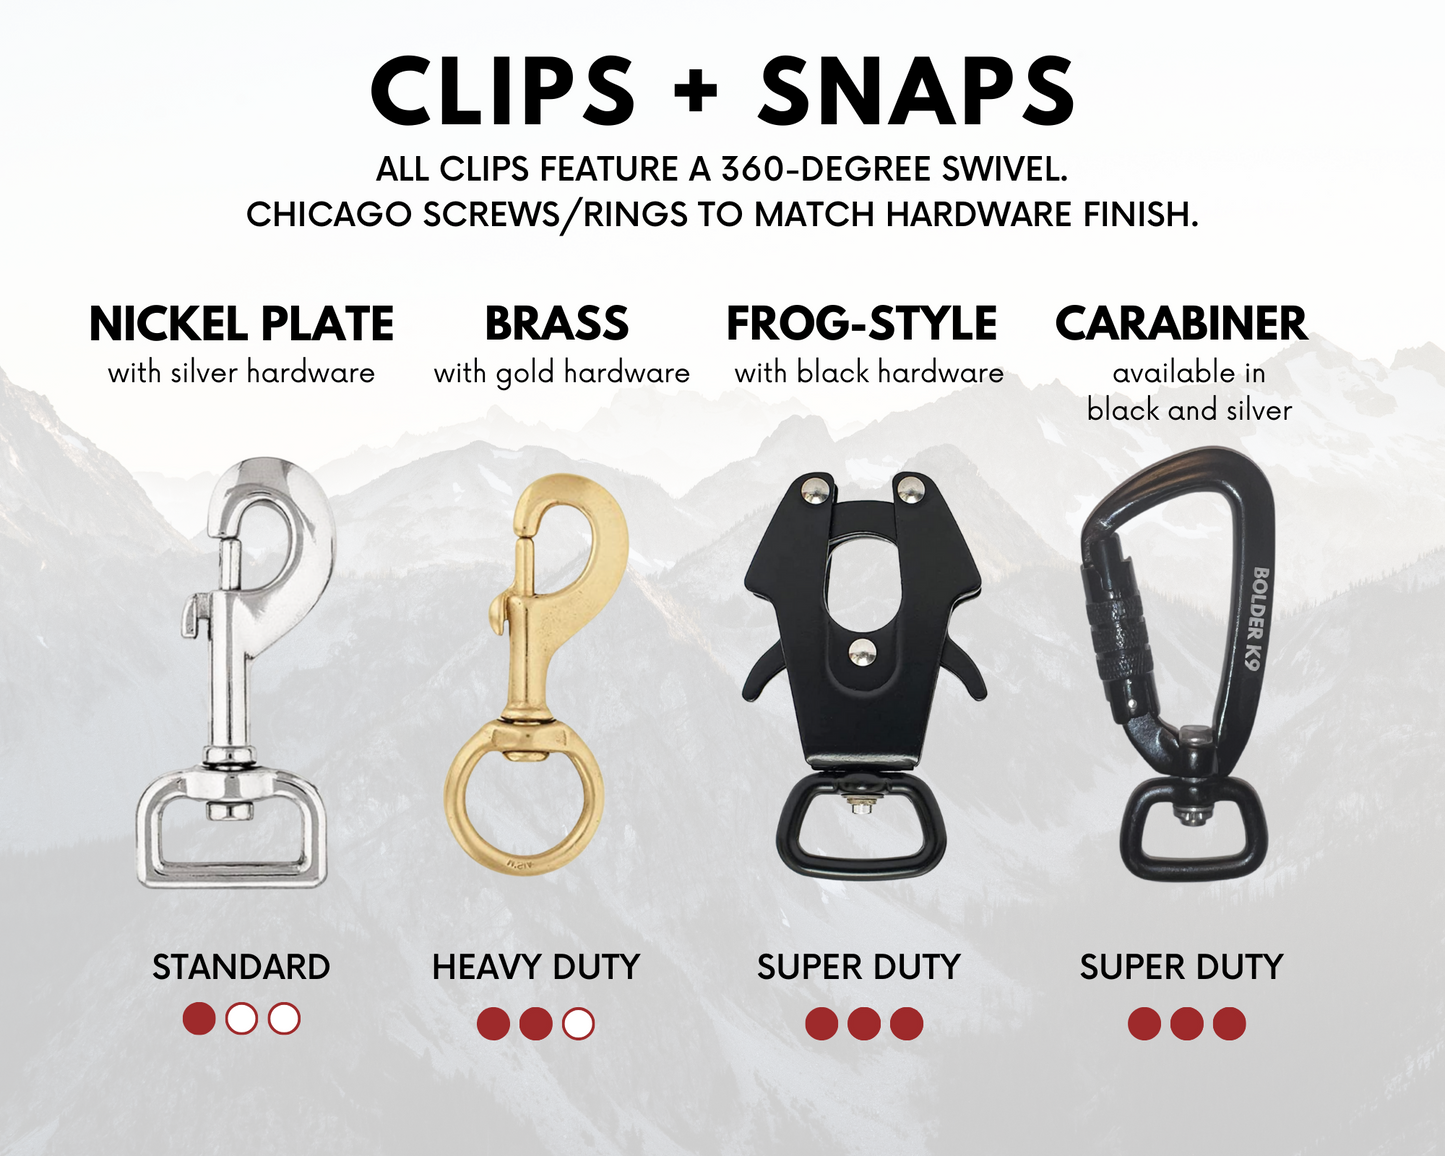 various leash clips and snaps displayed as an infographic.